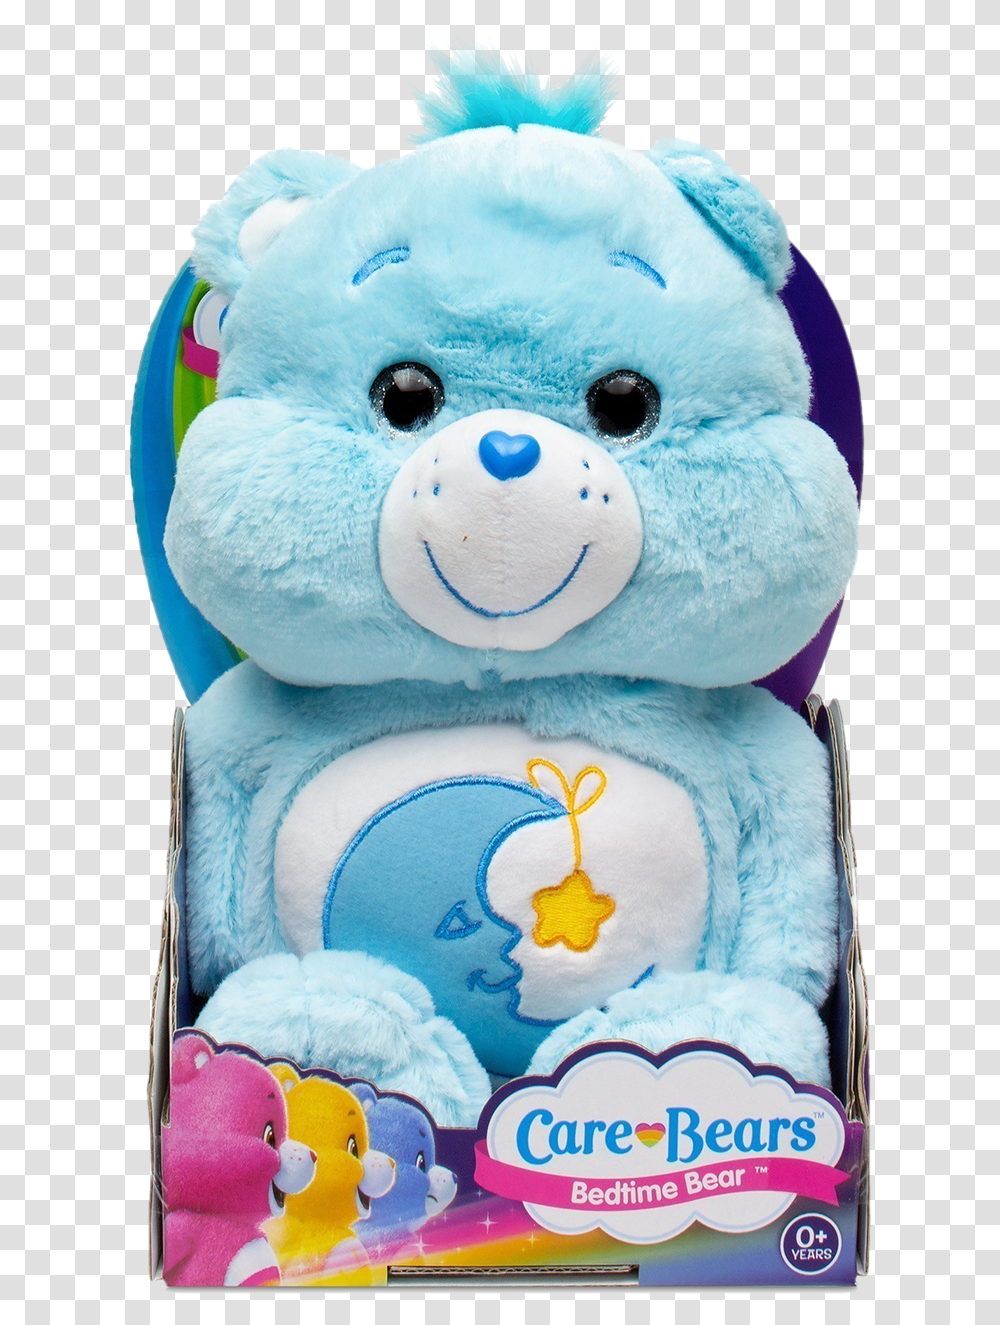 Bedtime Bear 12 Plush Fon Forge Care Bears Stuff Toys, Sweets, Food, Confectionery Transparent Png